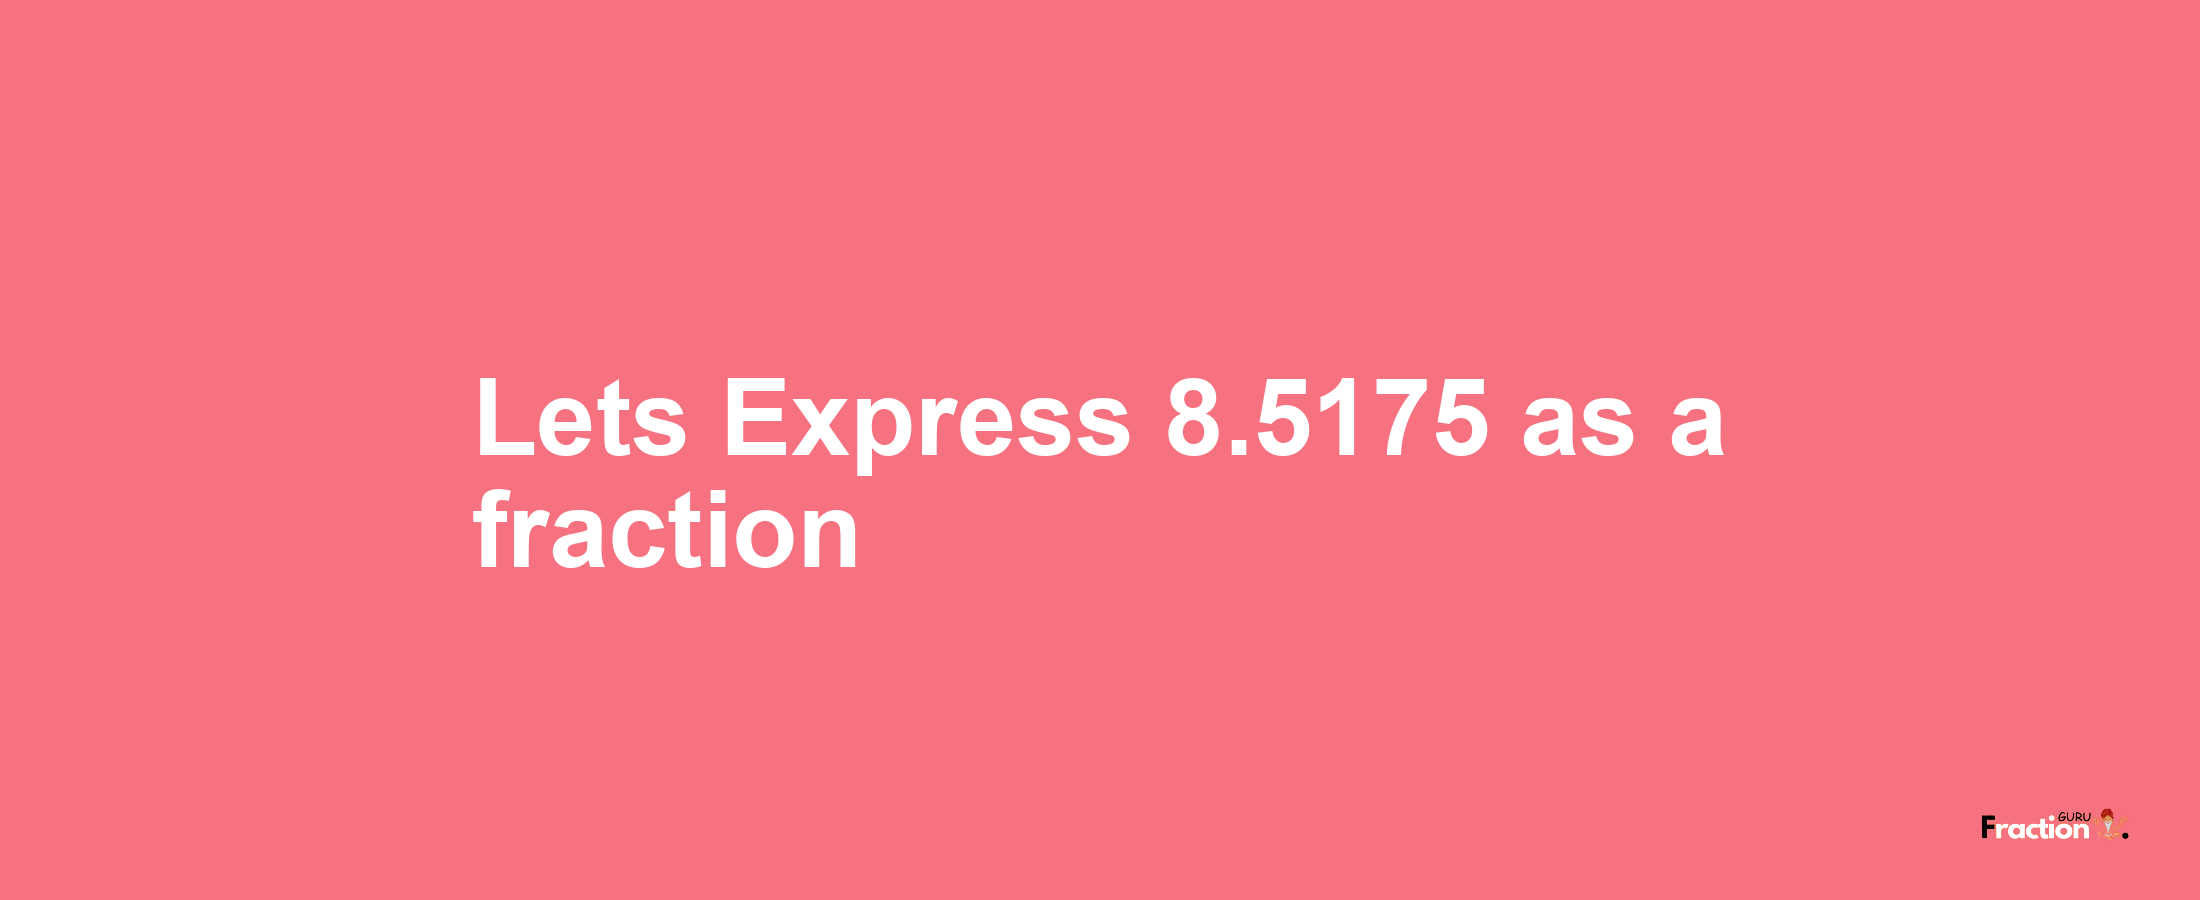 Lets Express 8.5175 as afraction